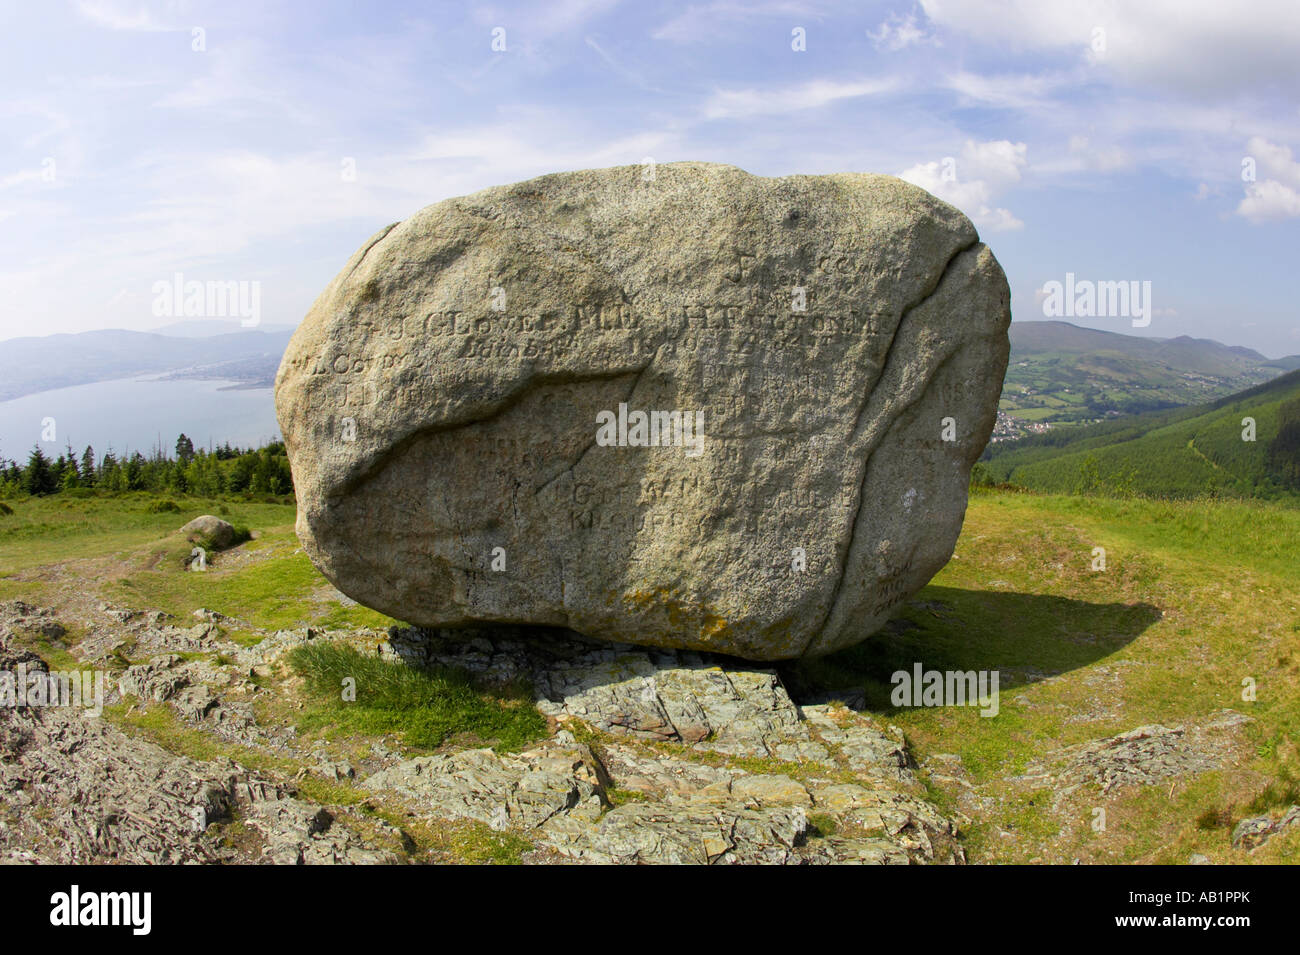 wide of the area around the The cloughmore stone on Slieve Martin Rostrevor Stock Photo